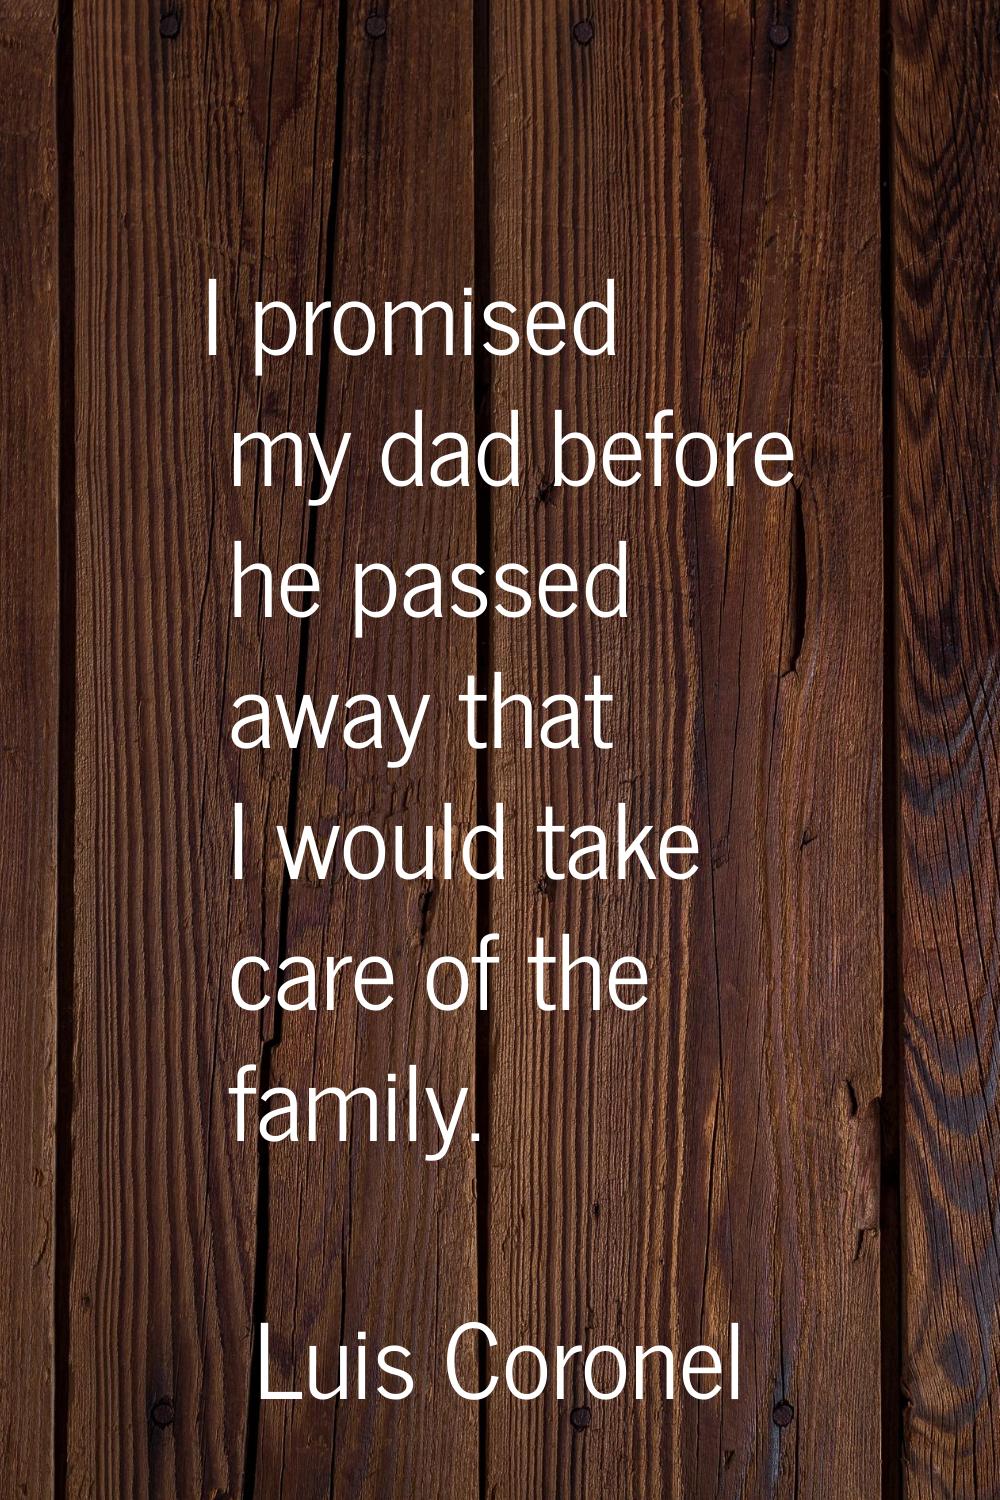 I promised my dad before he passed away that I would take care of the family.